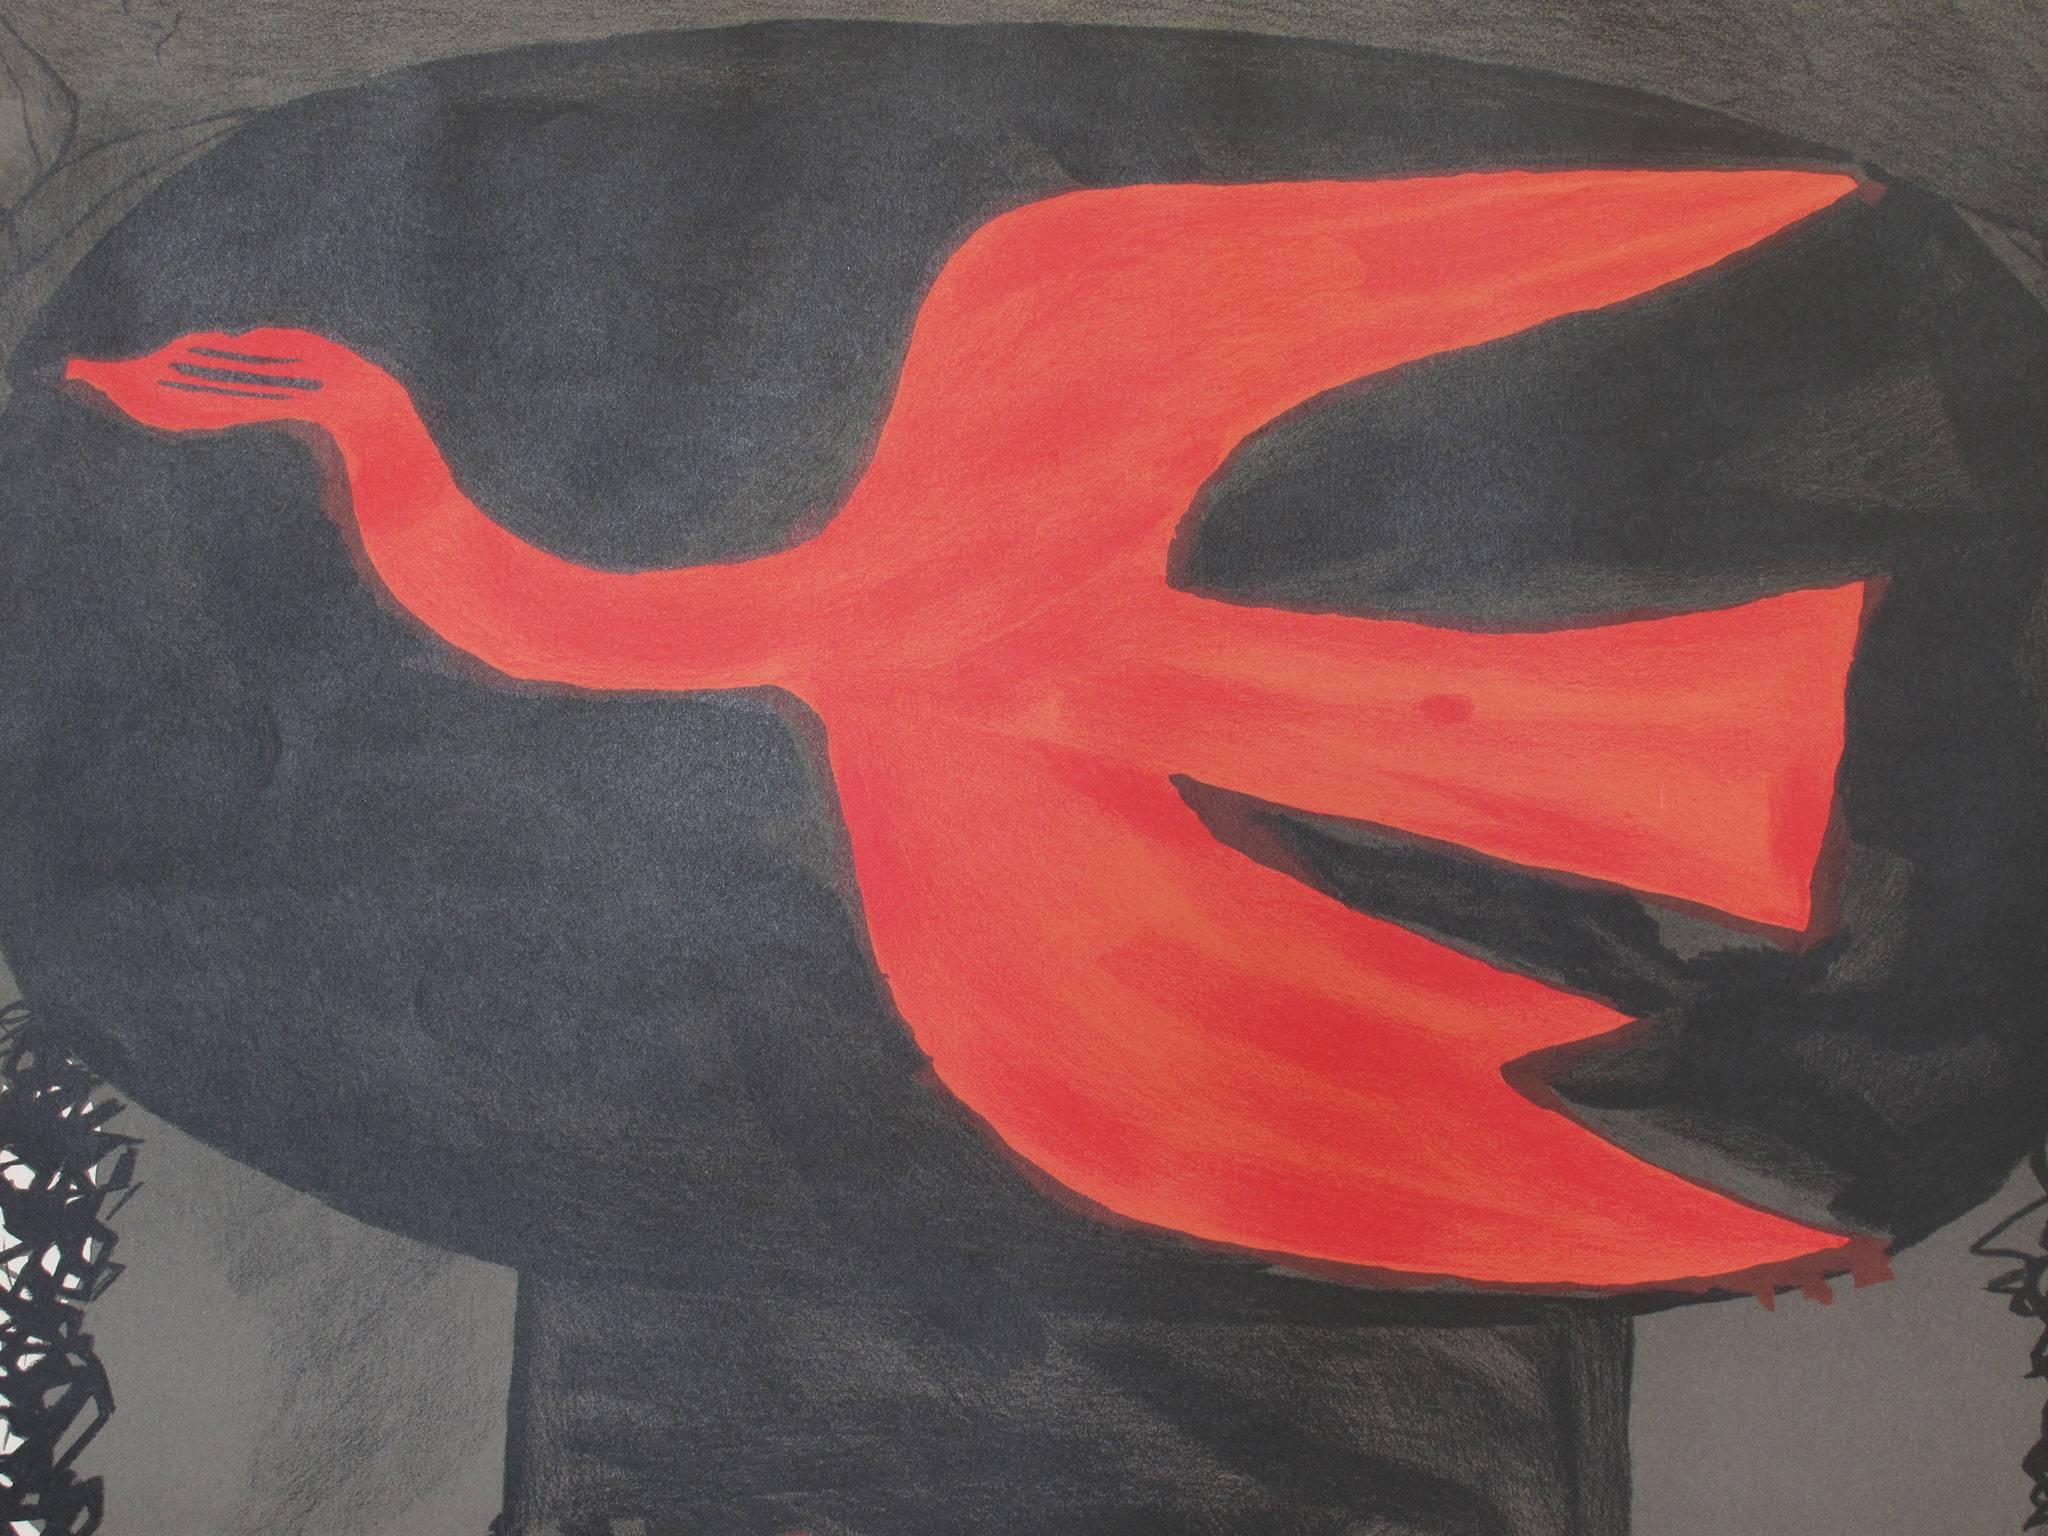 Georges Braque
'Three Birds,' 1960s, lithograph poster
Editions des Nouvelles Images, France
37 1/4 high x 26 wide inches
 